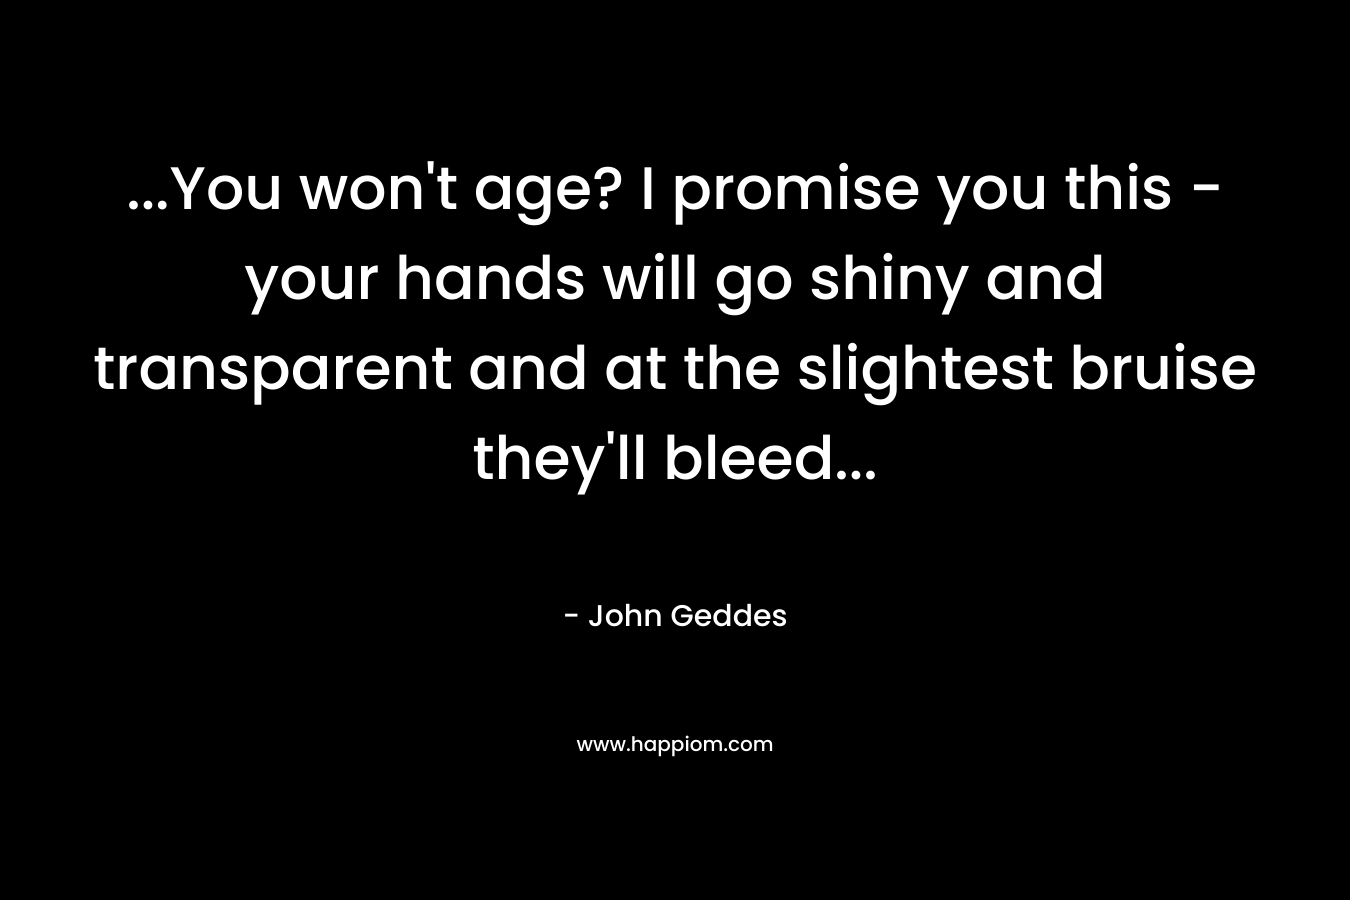 …You won’t age? I promise you this – your hands will go shiny and transparent and at the slightest bruise they’ll bleed… – John Geddes